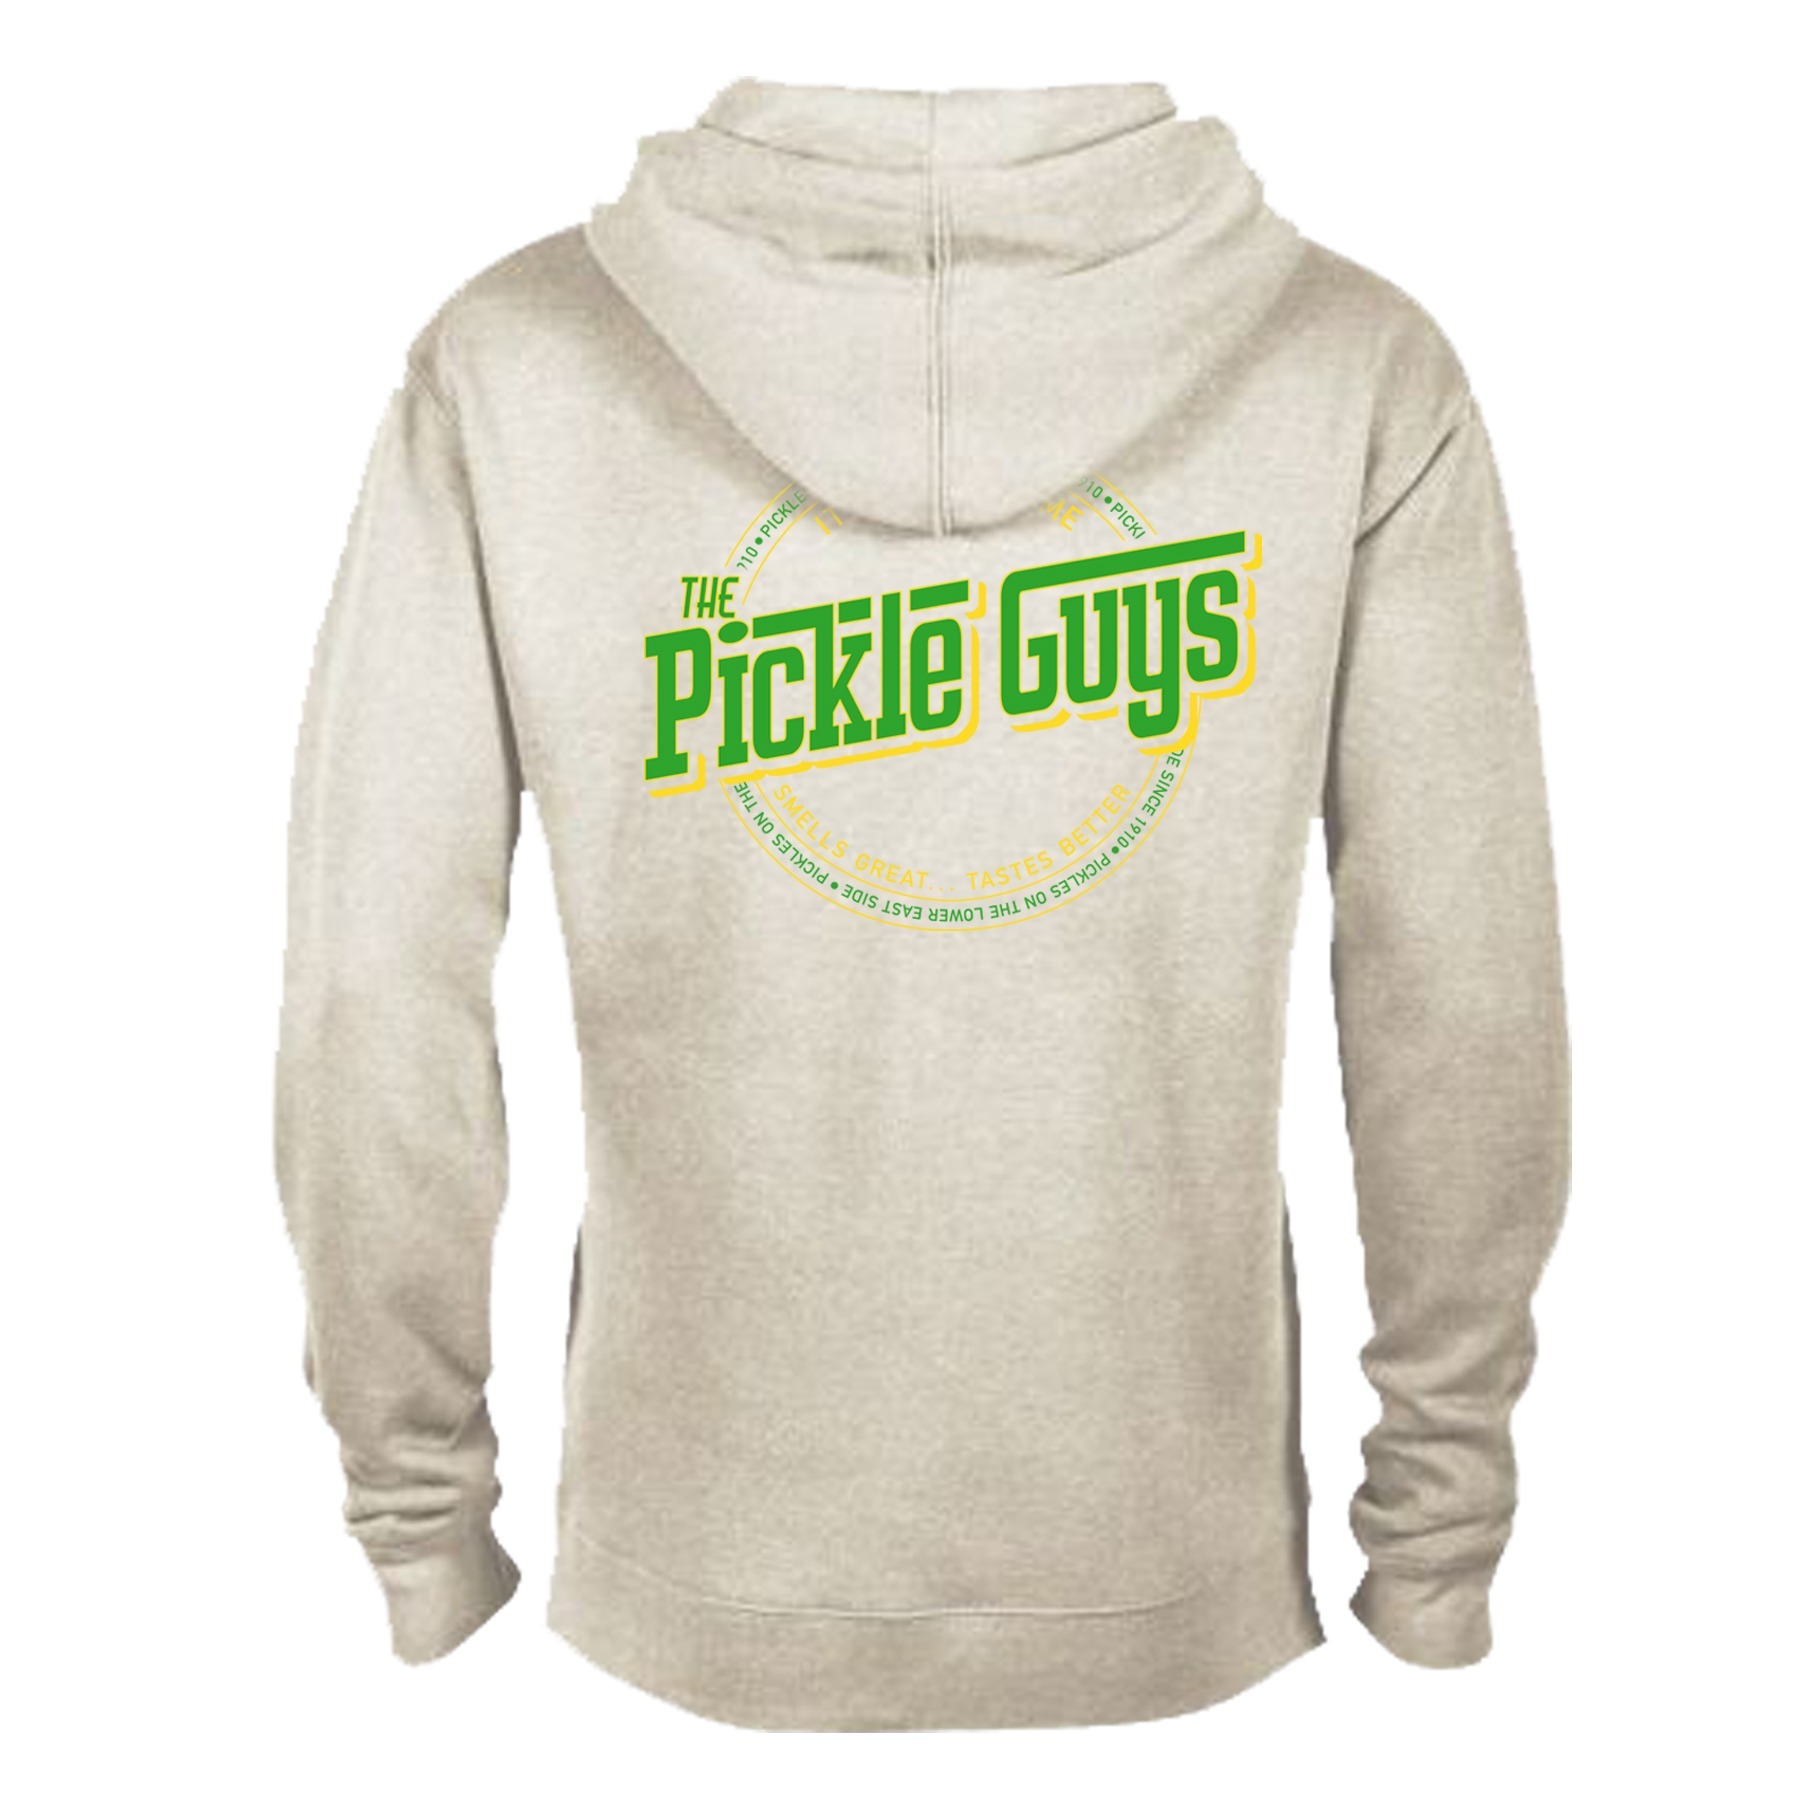 Pickle Guys Hoodie Sweatshirt White – Shipping Included – The Pickle Guys